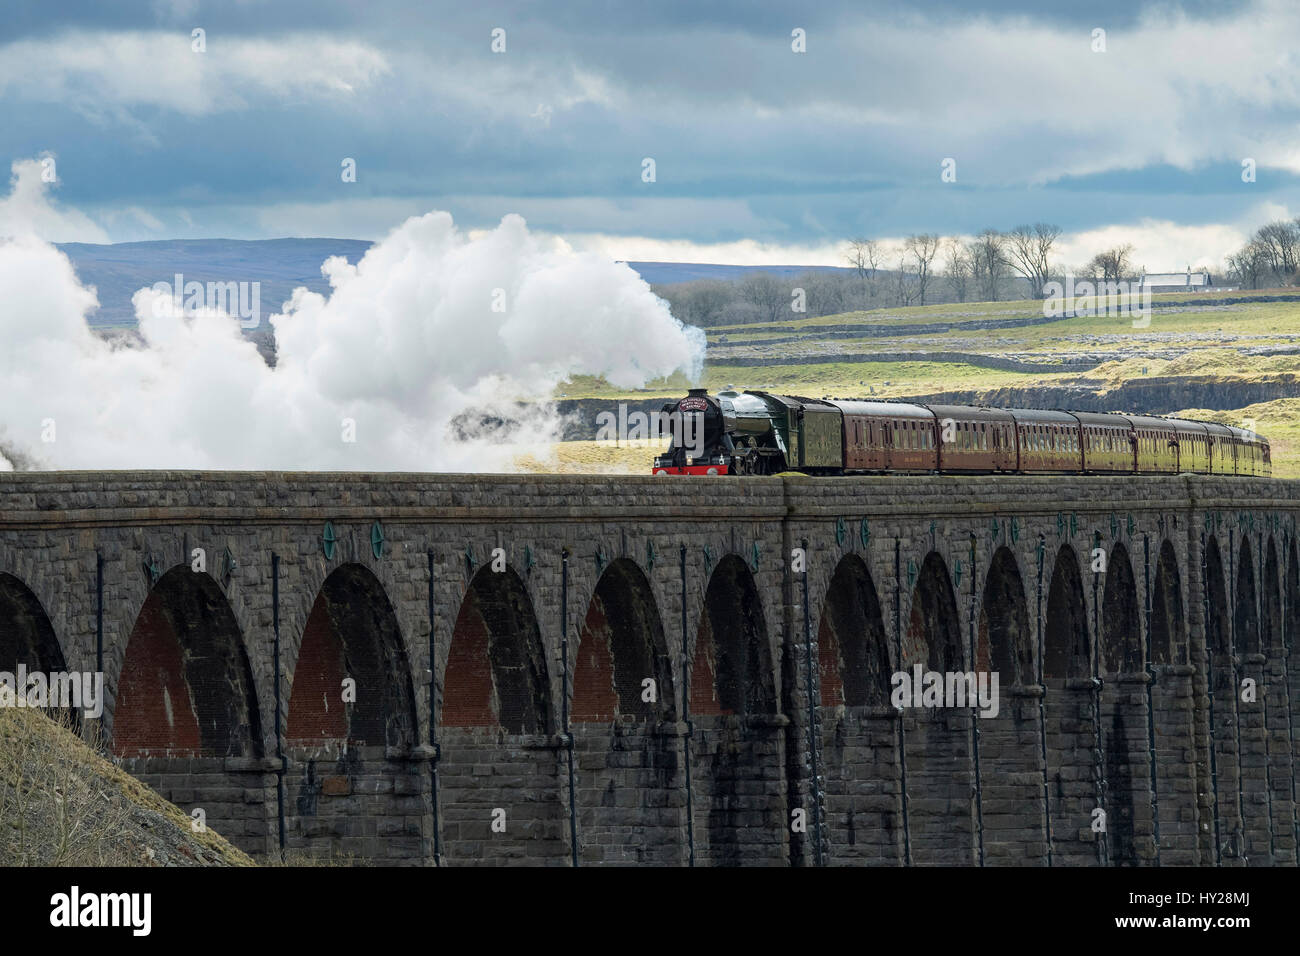 Ribblehead, North Yorkshire, UK. 31st March 2017. The iconic steam locomotive LNER class A3 60103 Flying Scotsman, travels over the Ribblehead Viaduct. The train is travelling this route, taking part in the celebrations marking  the re-opening of the Settle Carlisle line. Credit: Ian Lamond/Alamy Live News Stock Photo